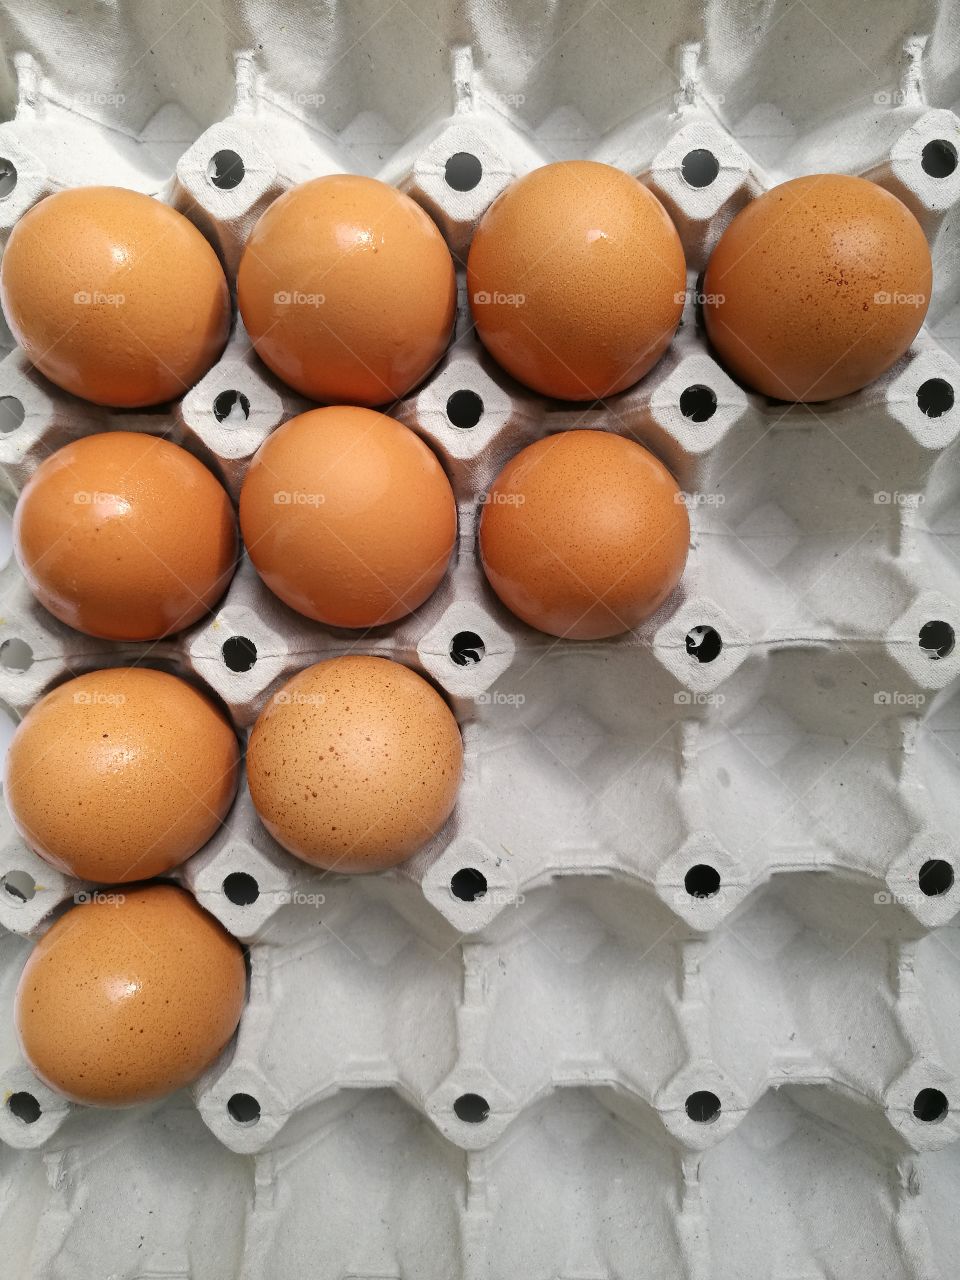 Eggs in tray